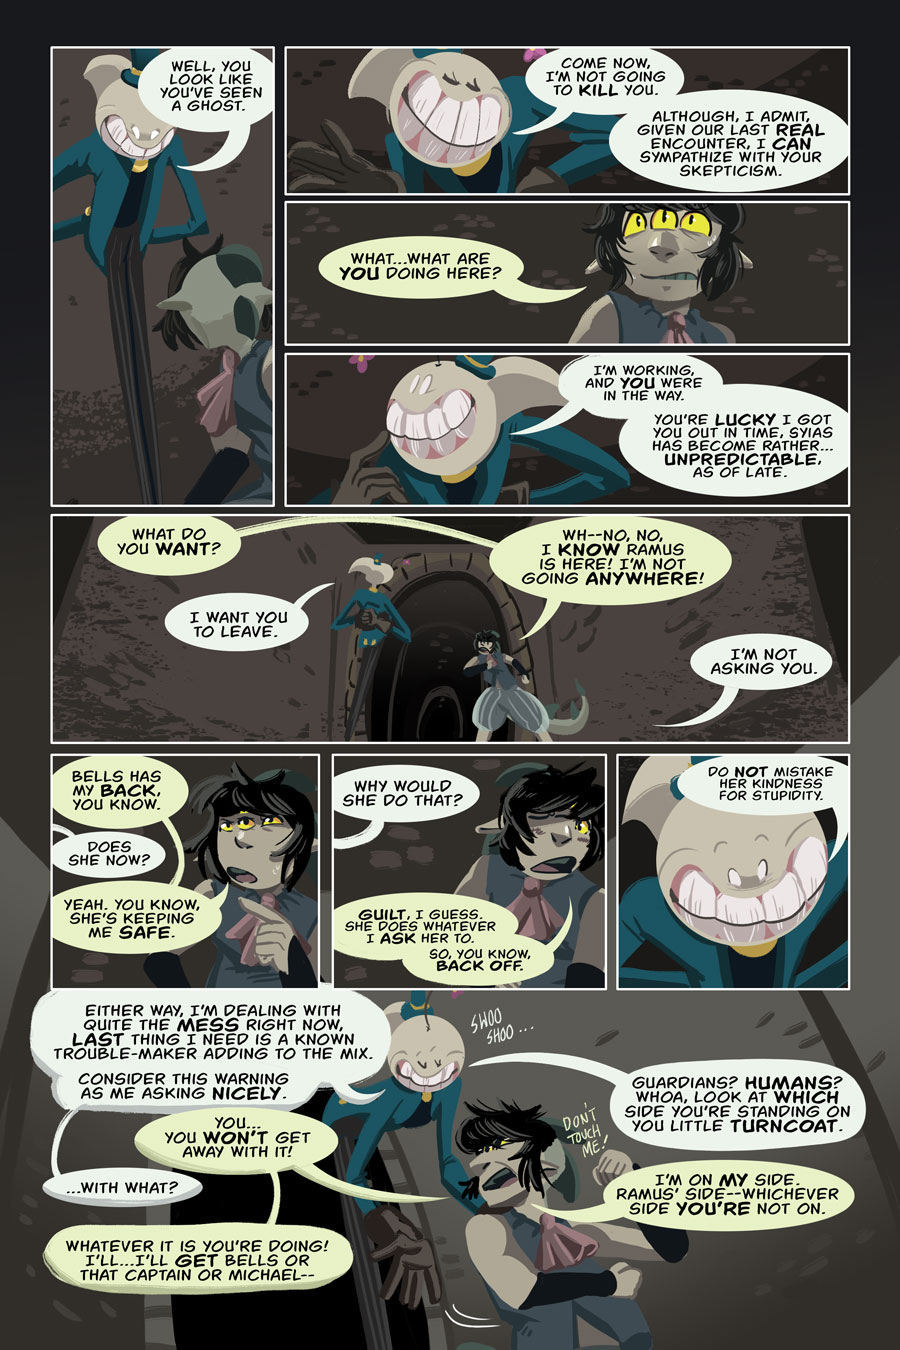 Chapter 8, page 26